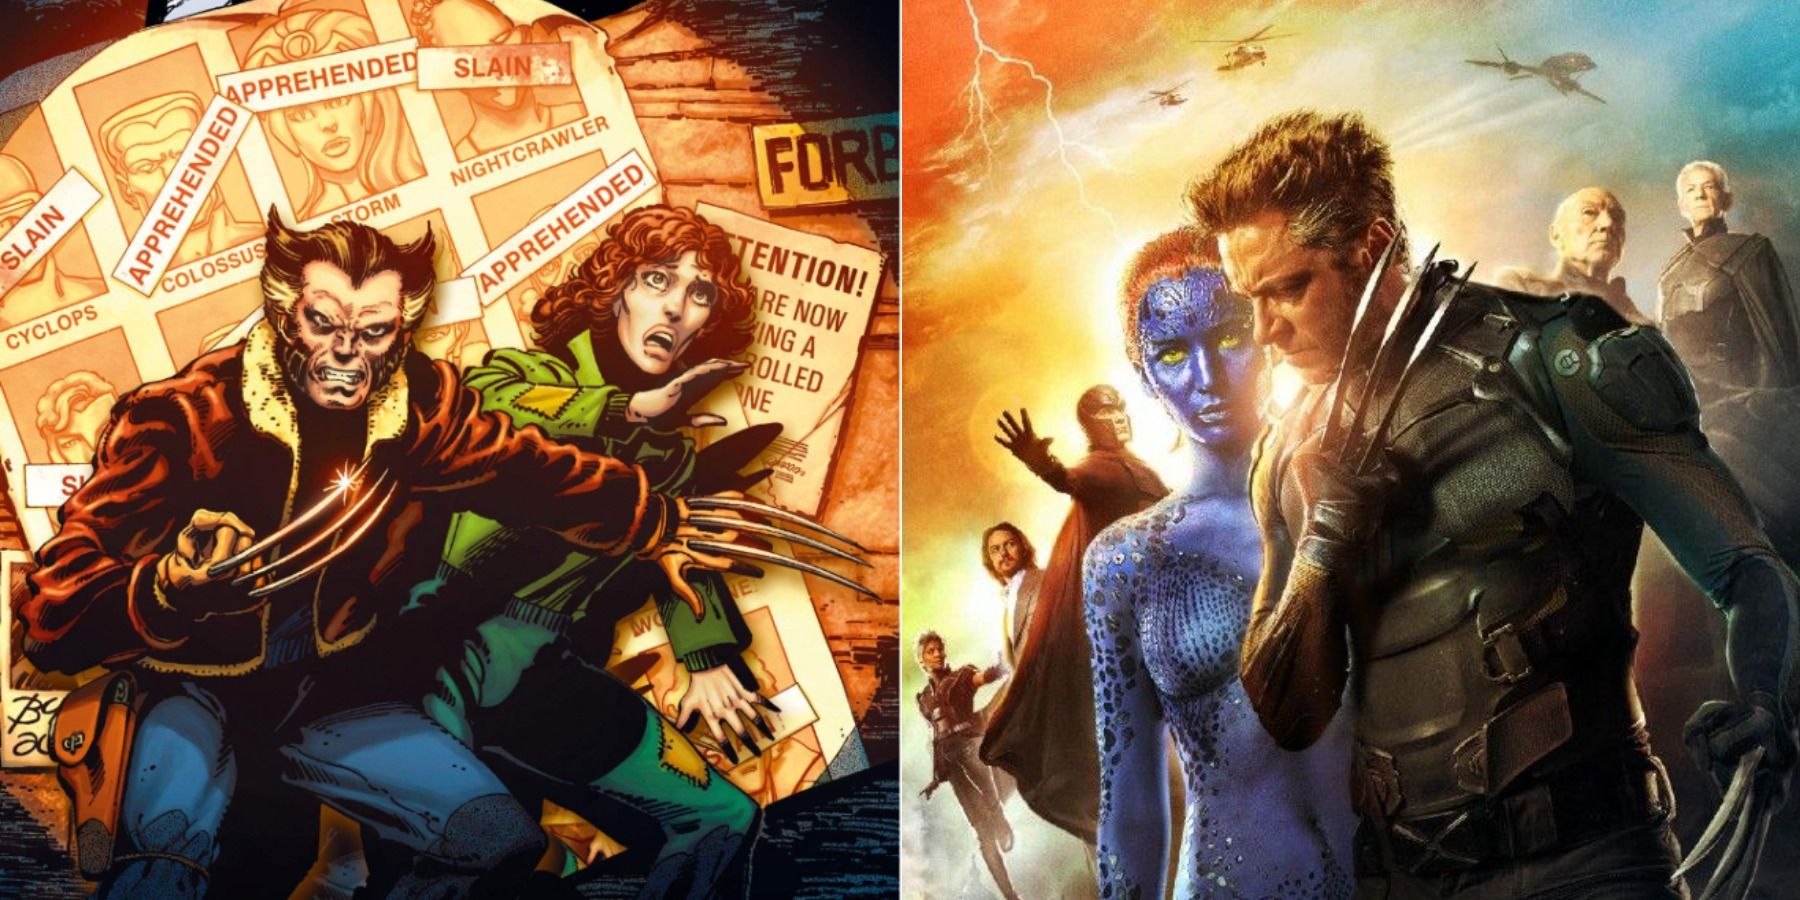 days of future past storyline